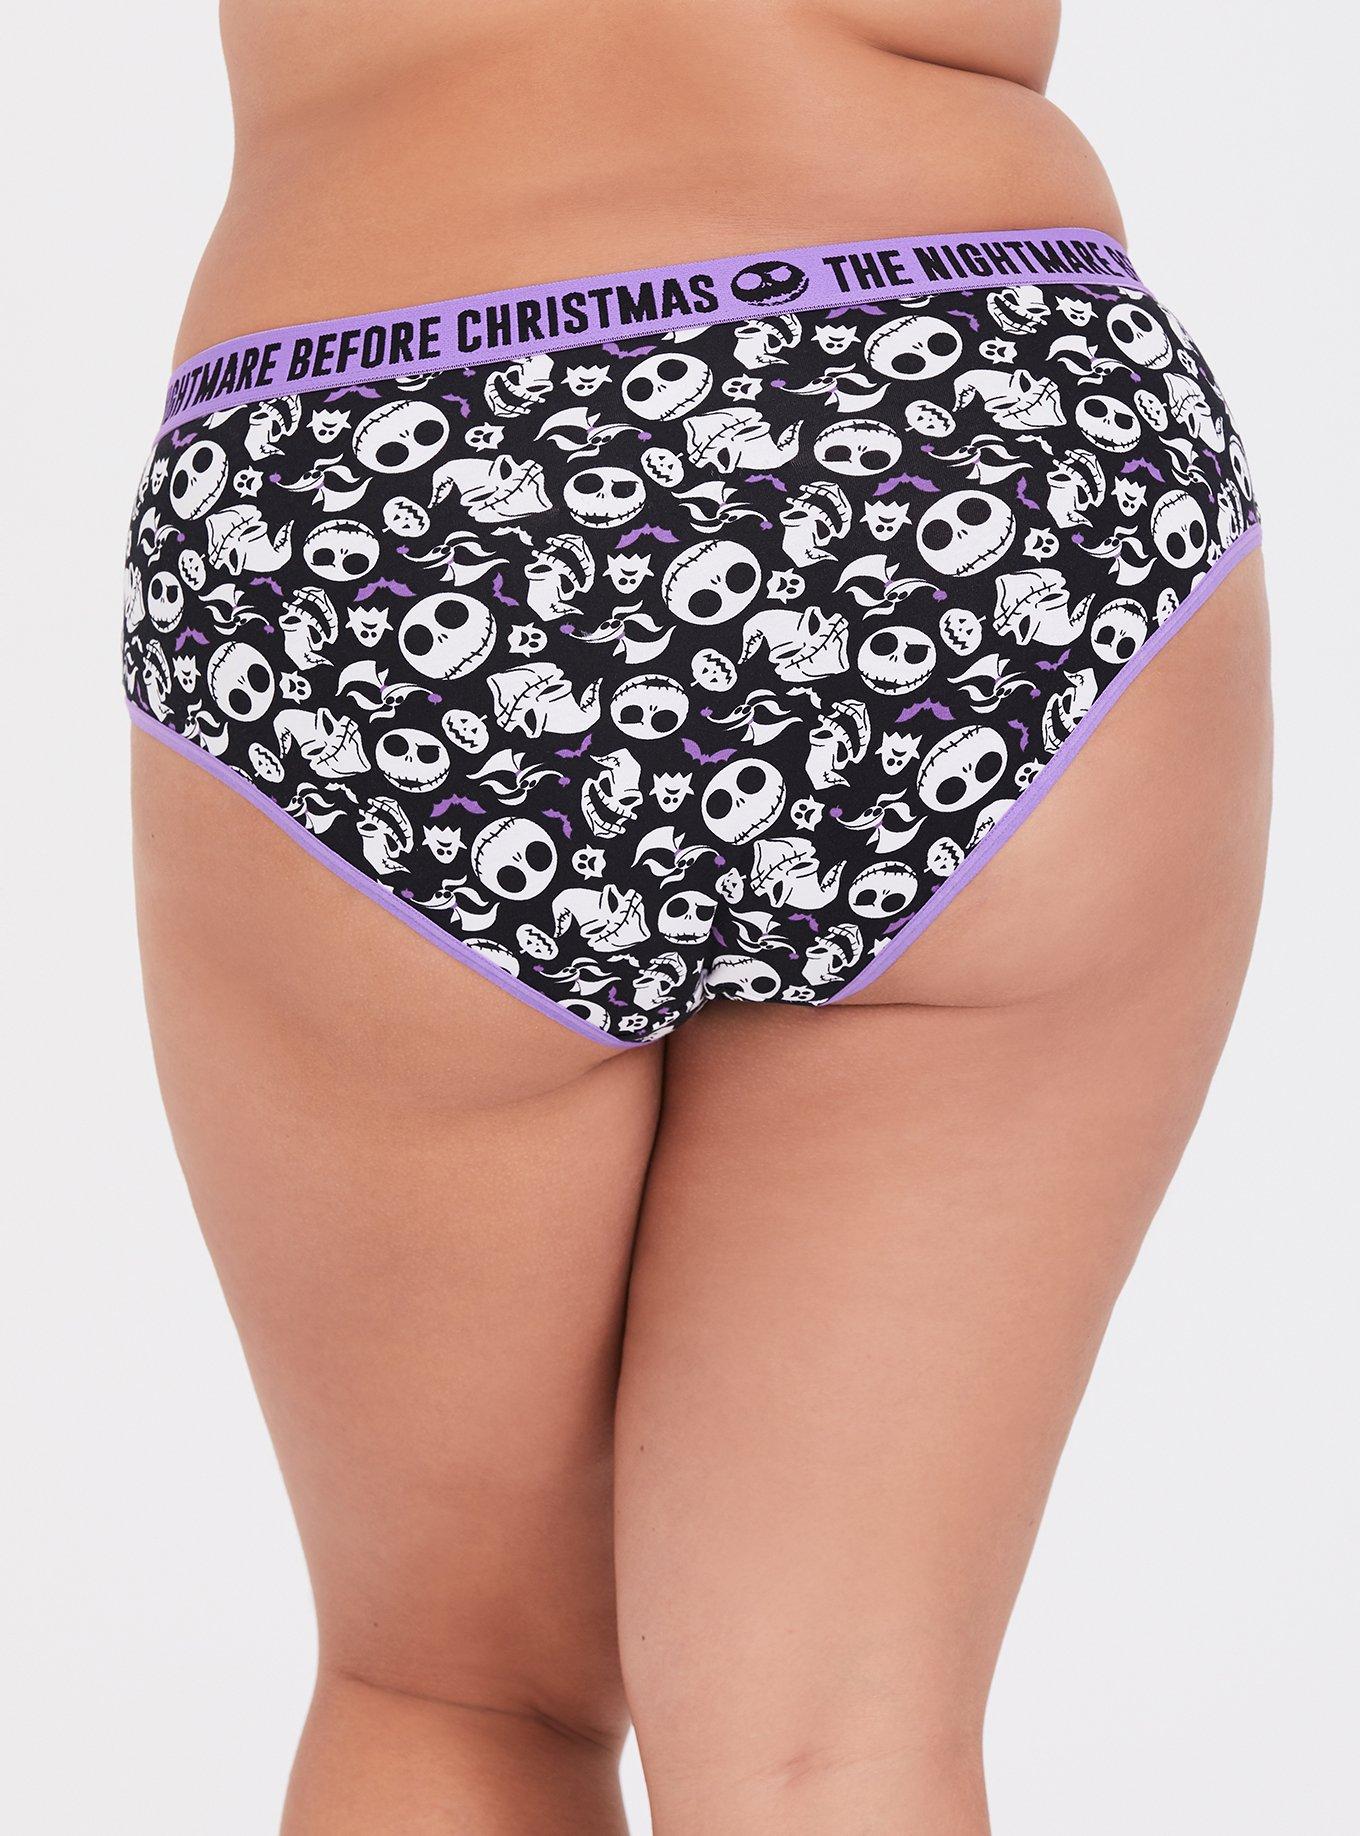 TORRID Disney The Nightmare Before Christmas Brief Mid Rise Cotton Panty